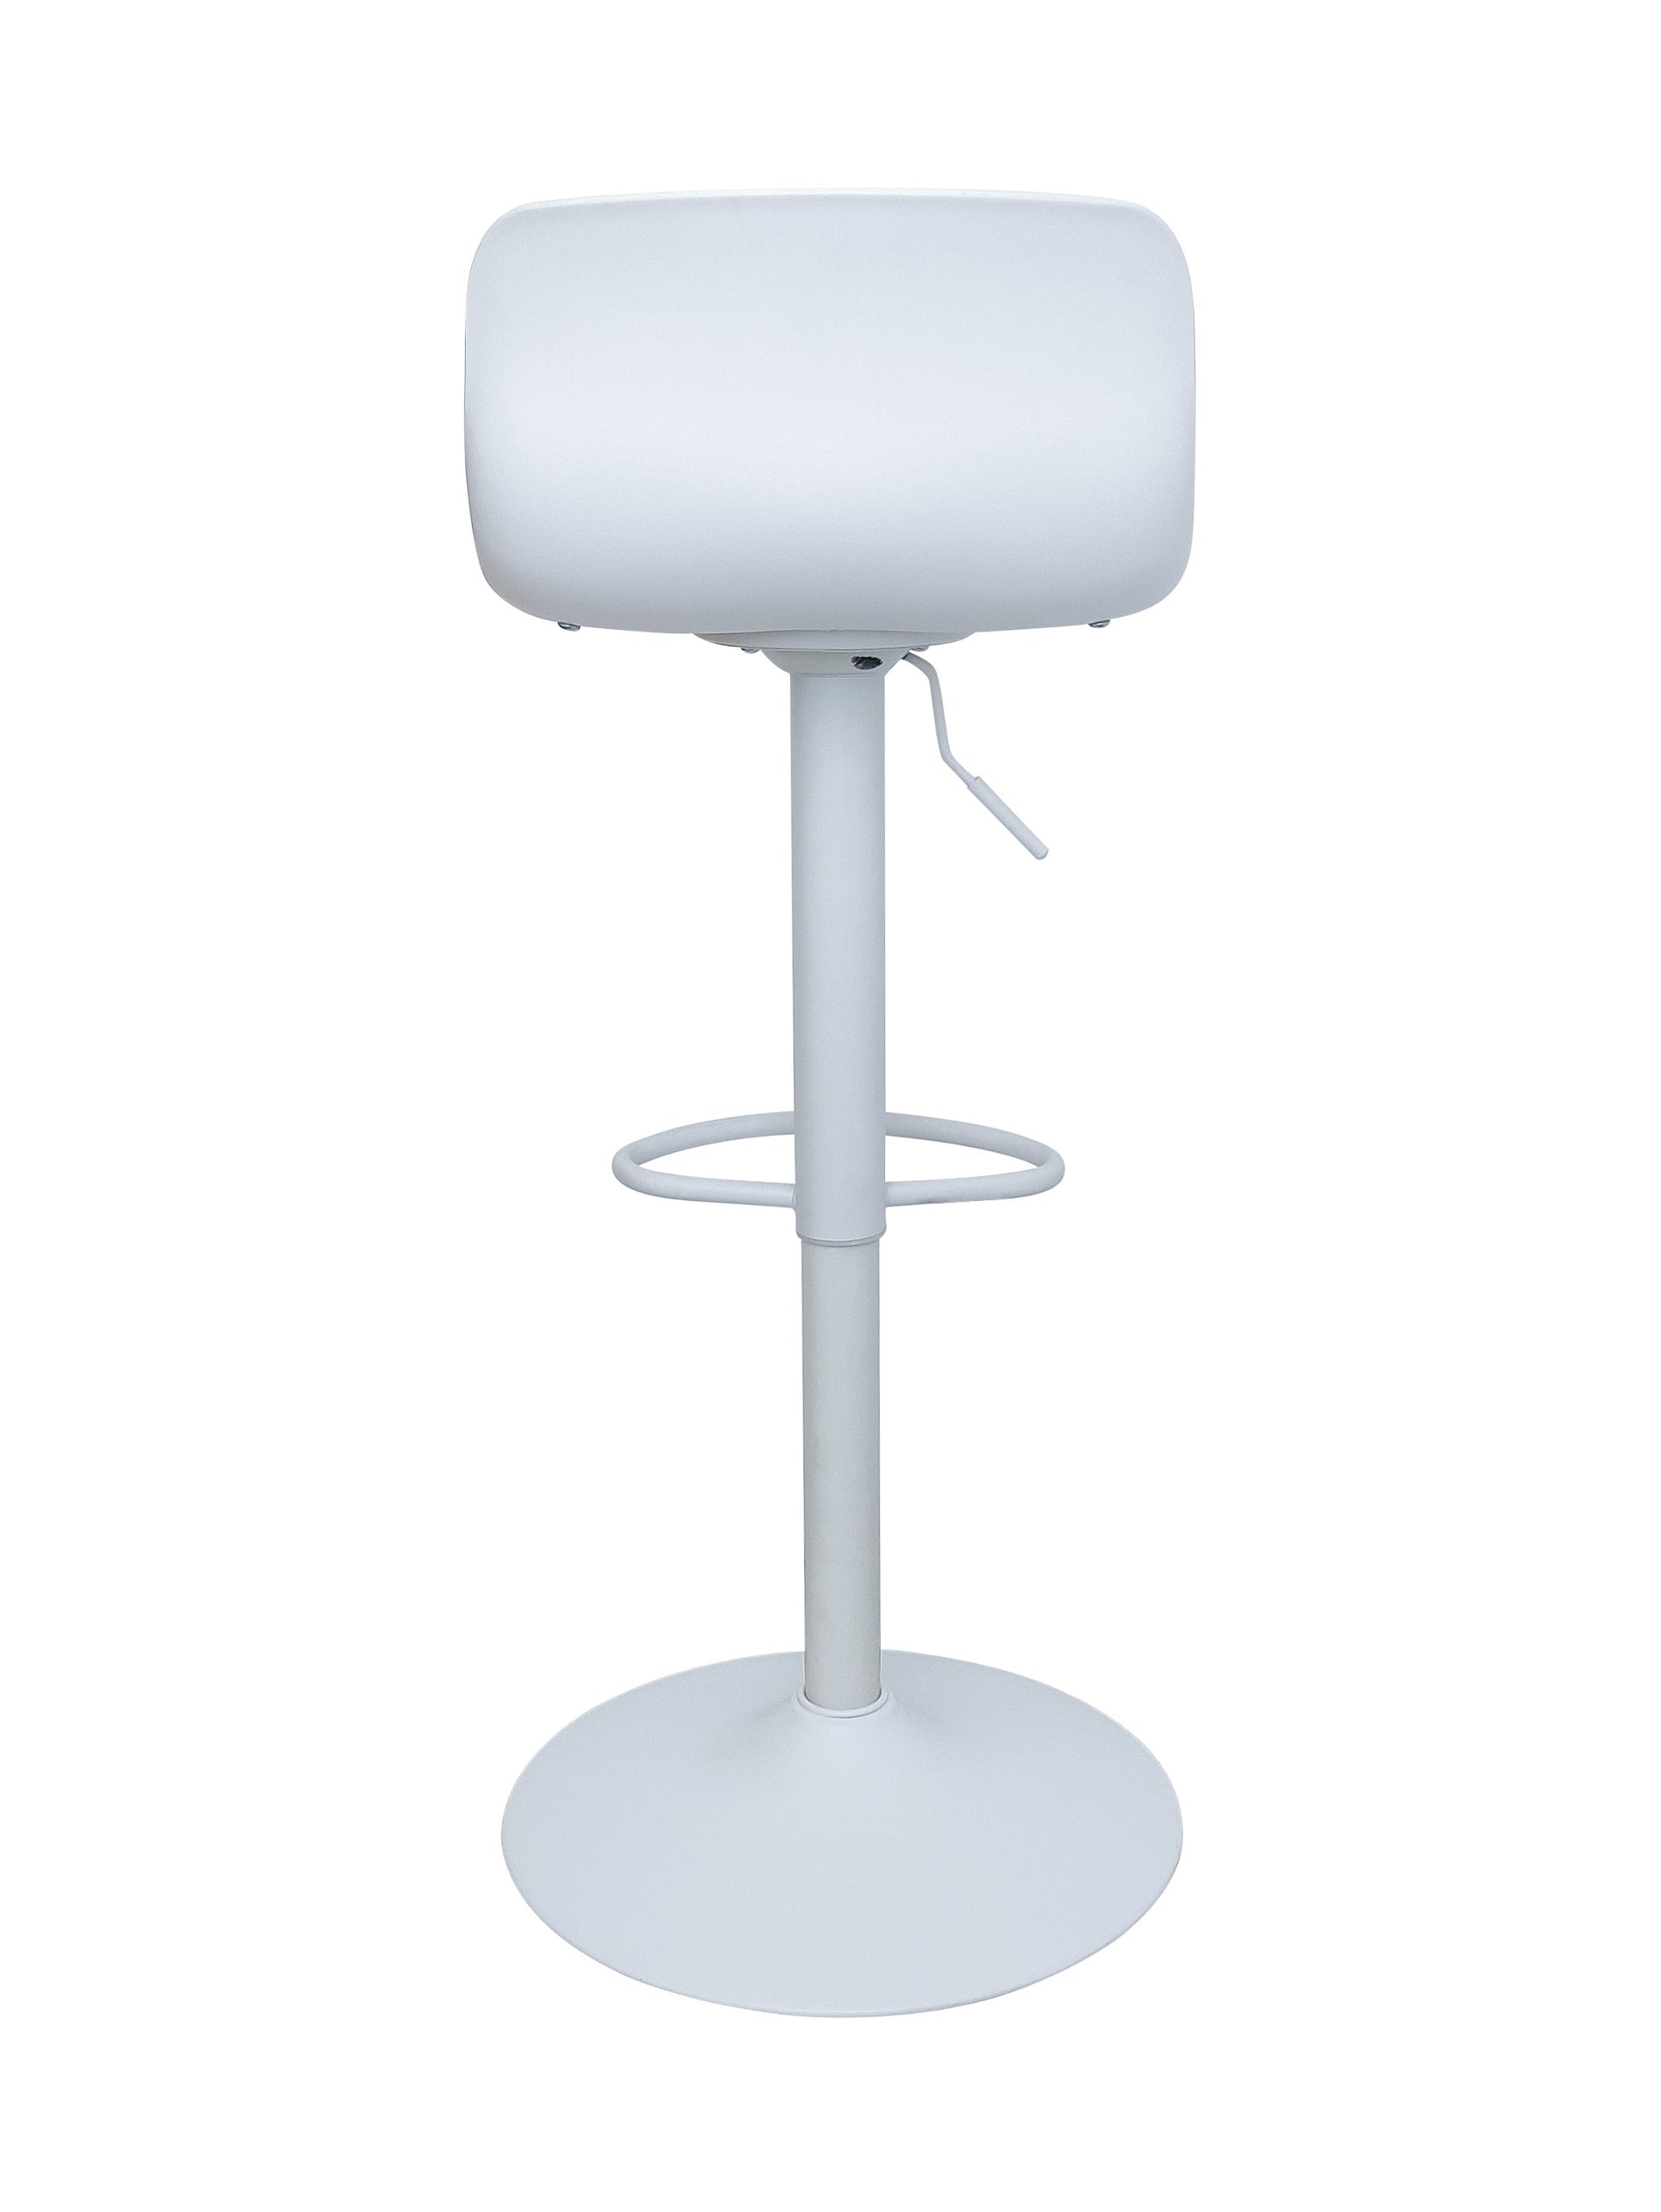 Bar Stools Set of 2 for Kitchen Counter Tall Barstools with Cushion White - Demine Essentials